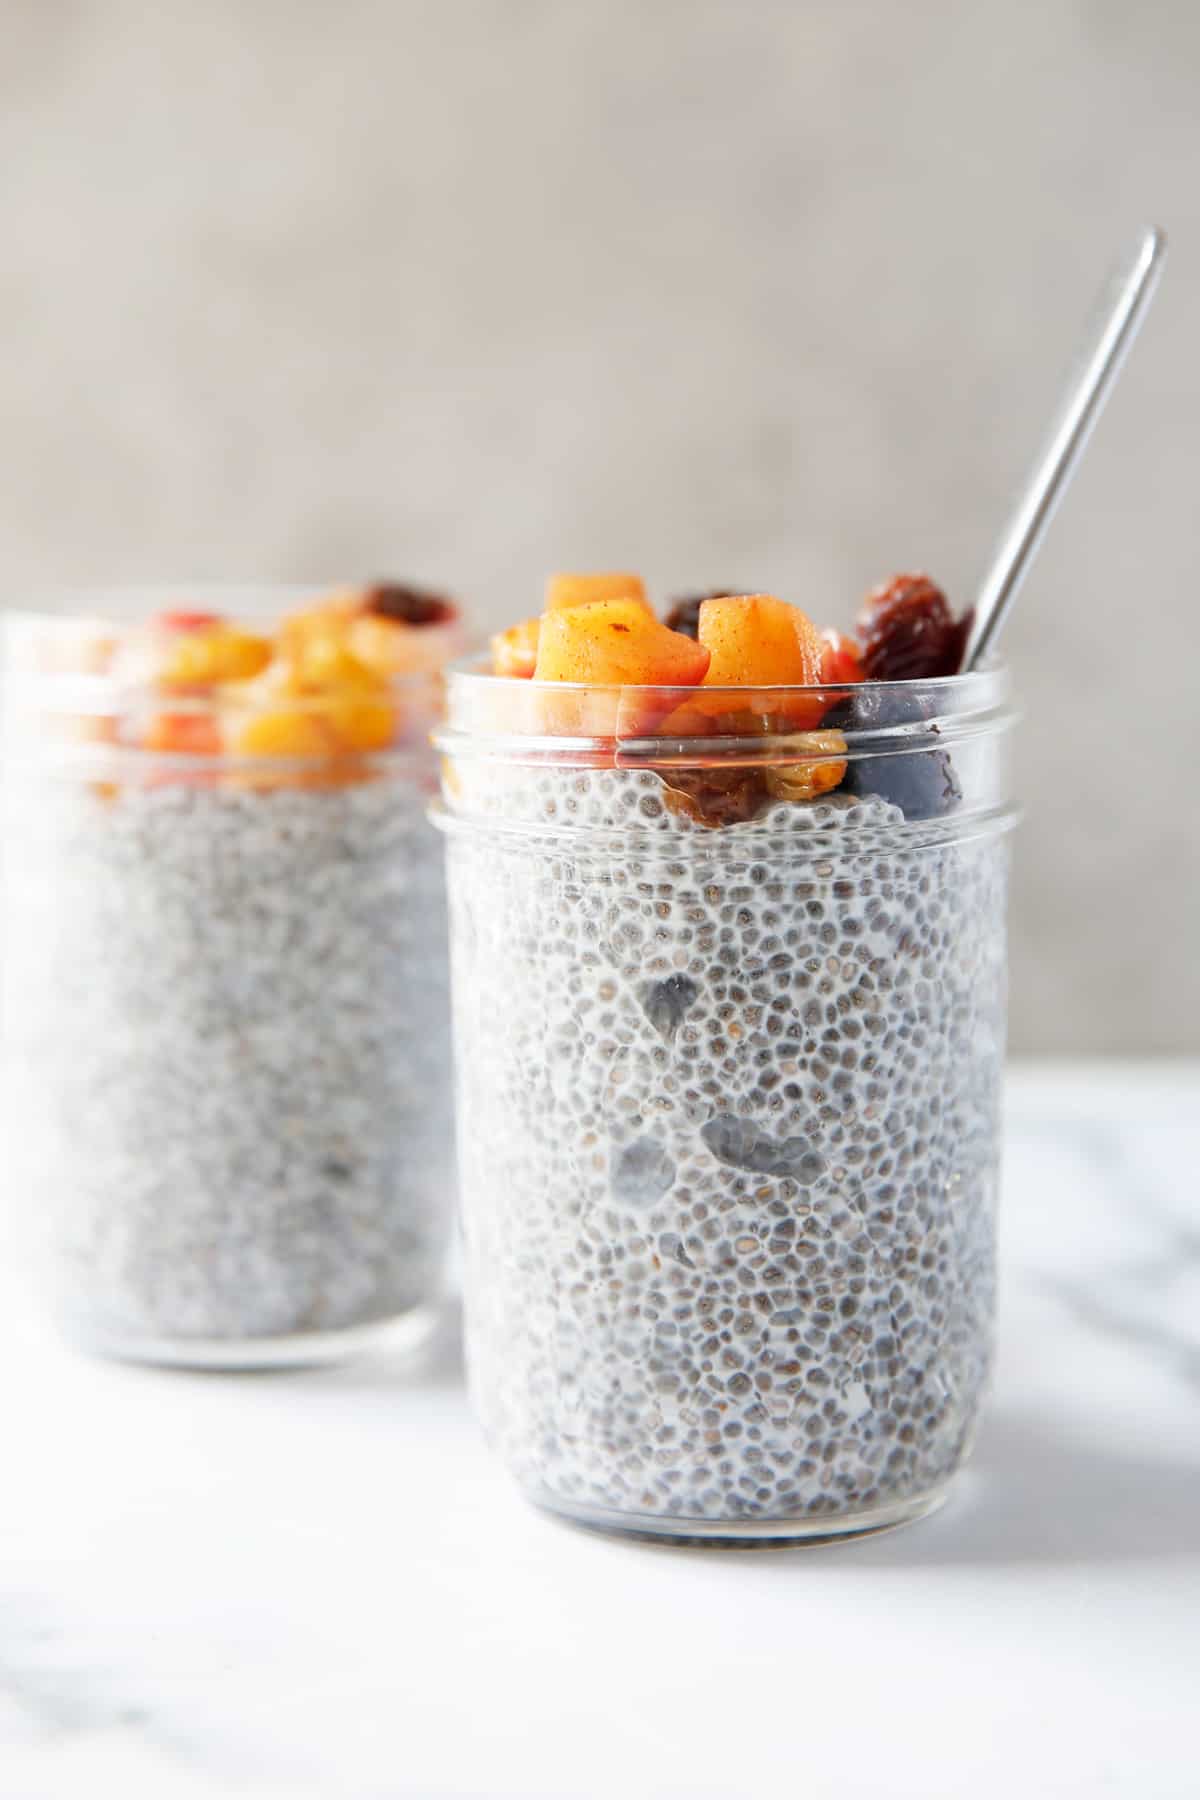 Two jars of chia seed pudding.